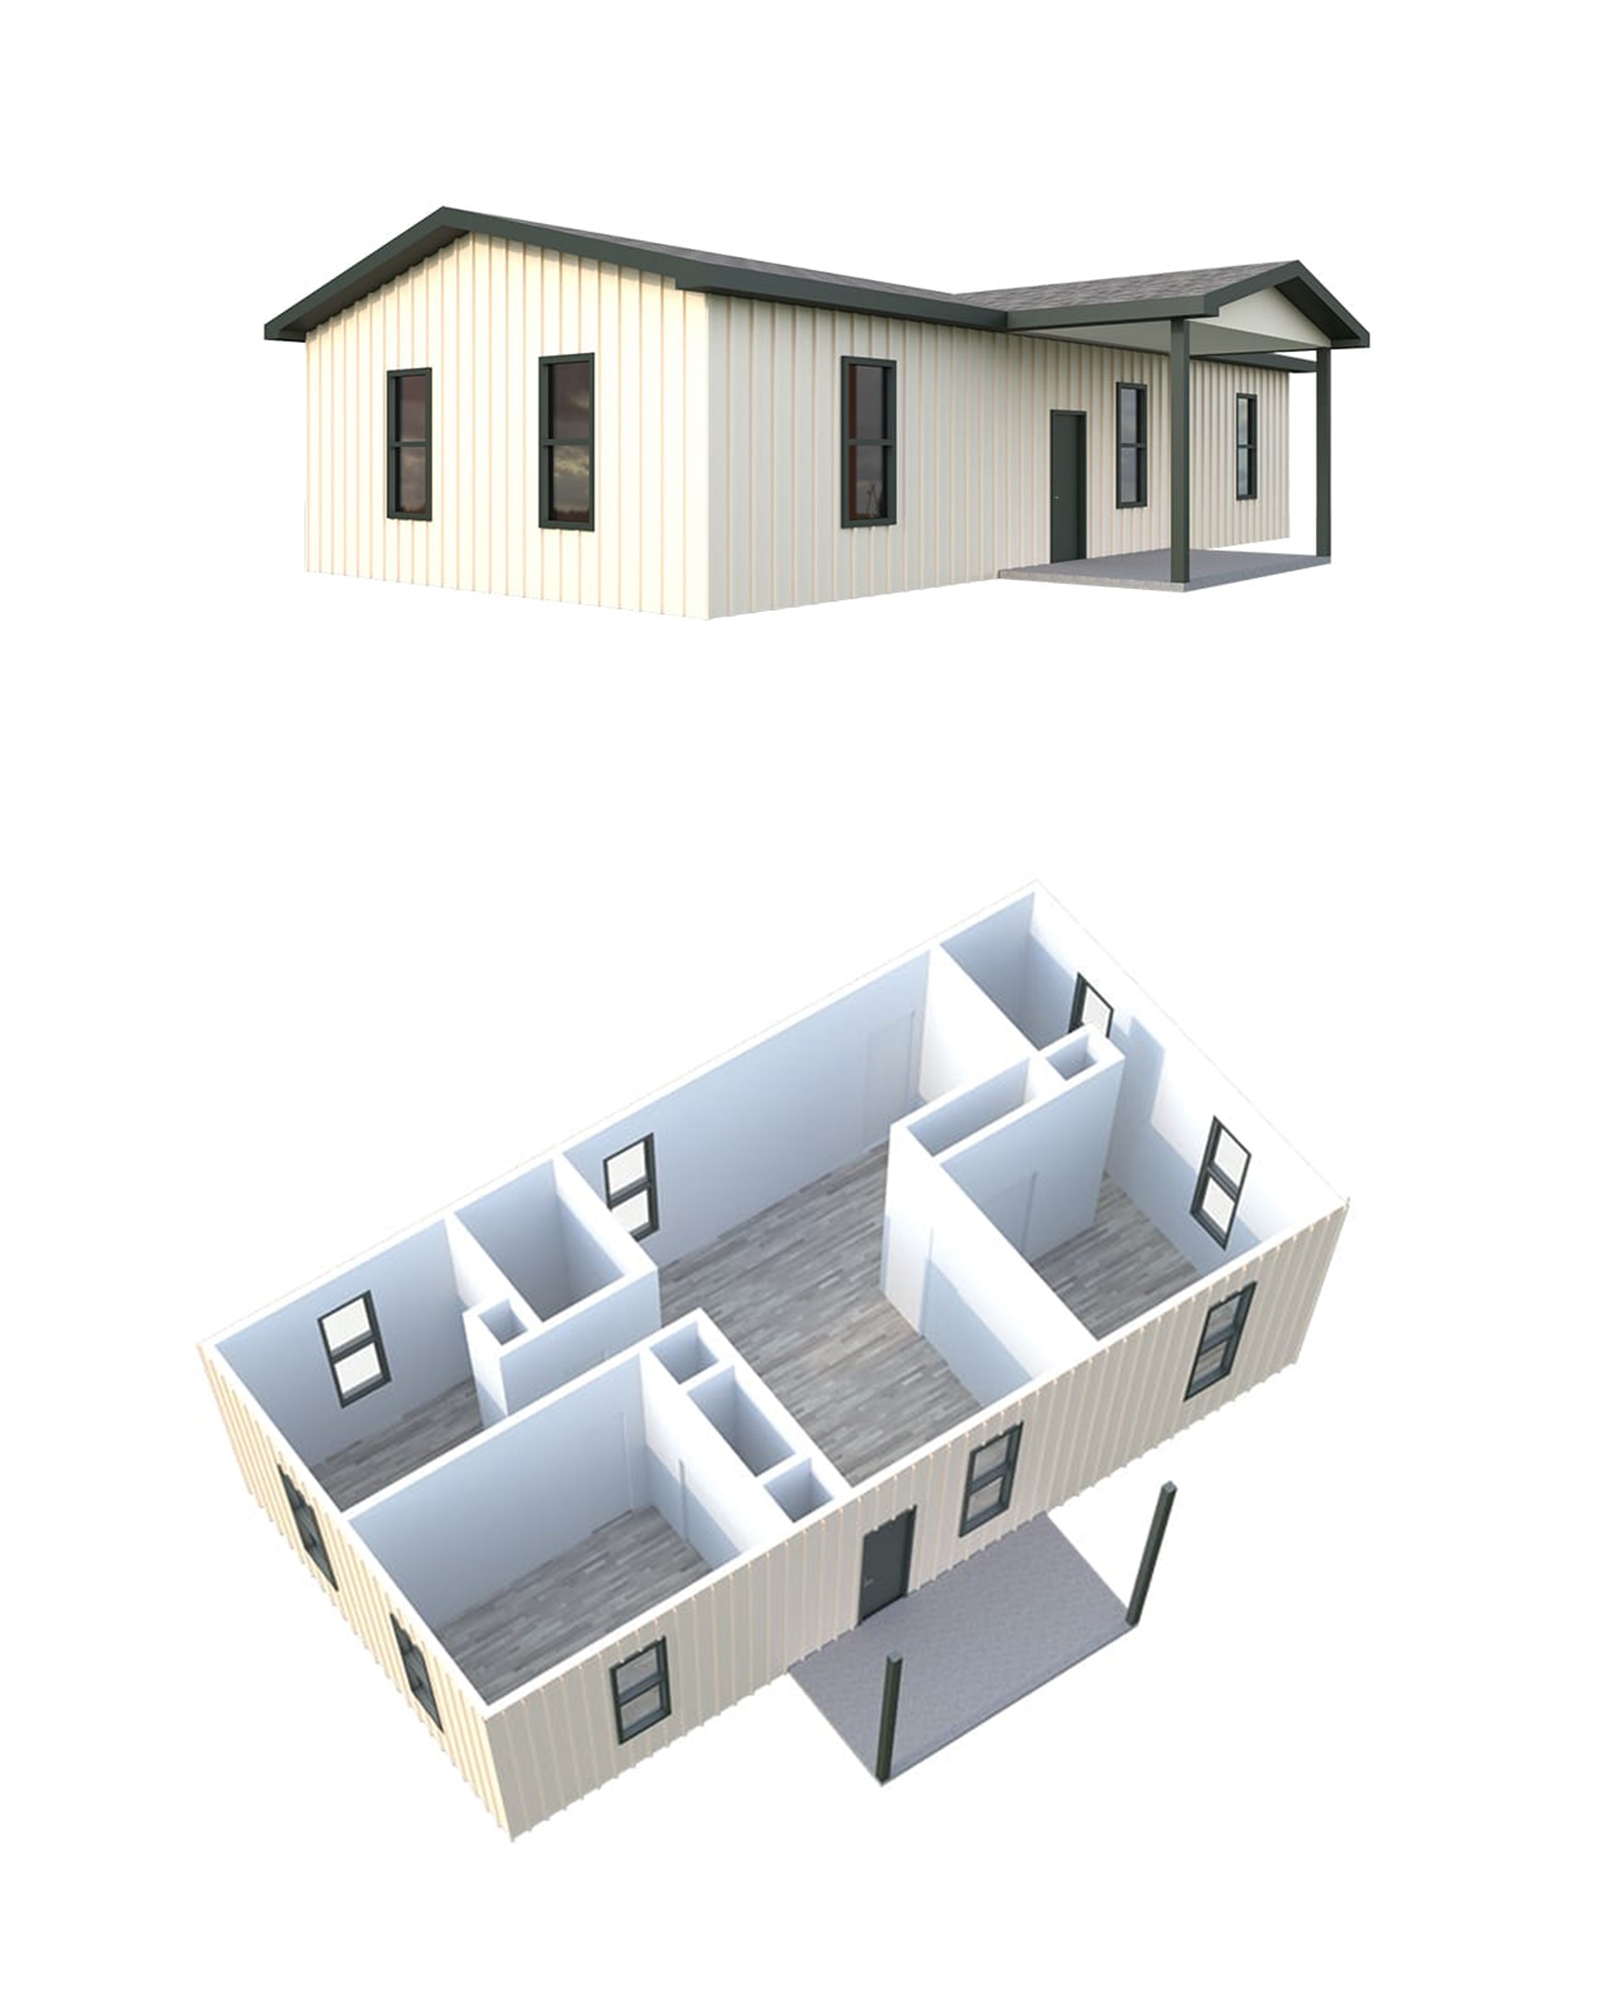 Building a Tiny Home Costs, Floor Plans & More General Steel